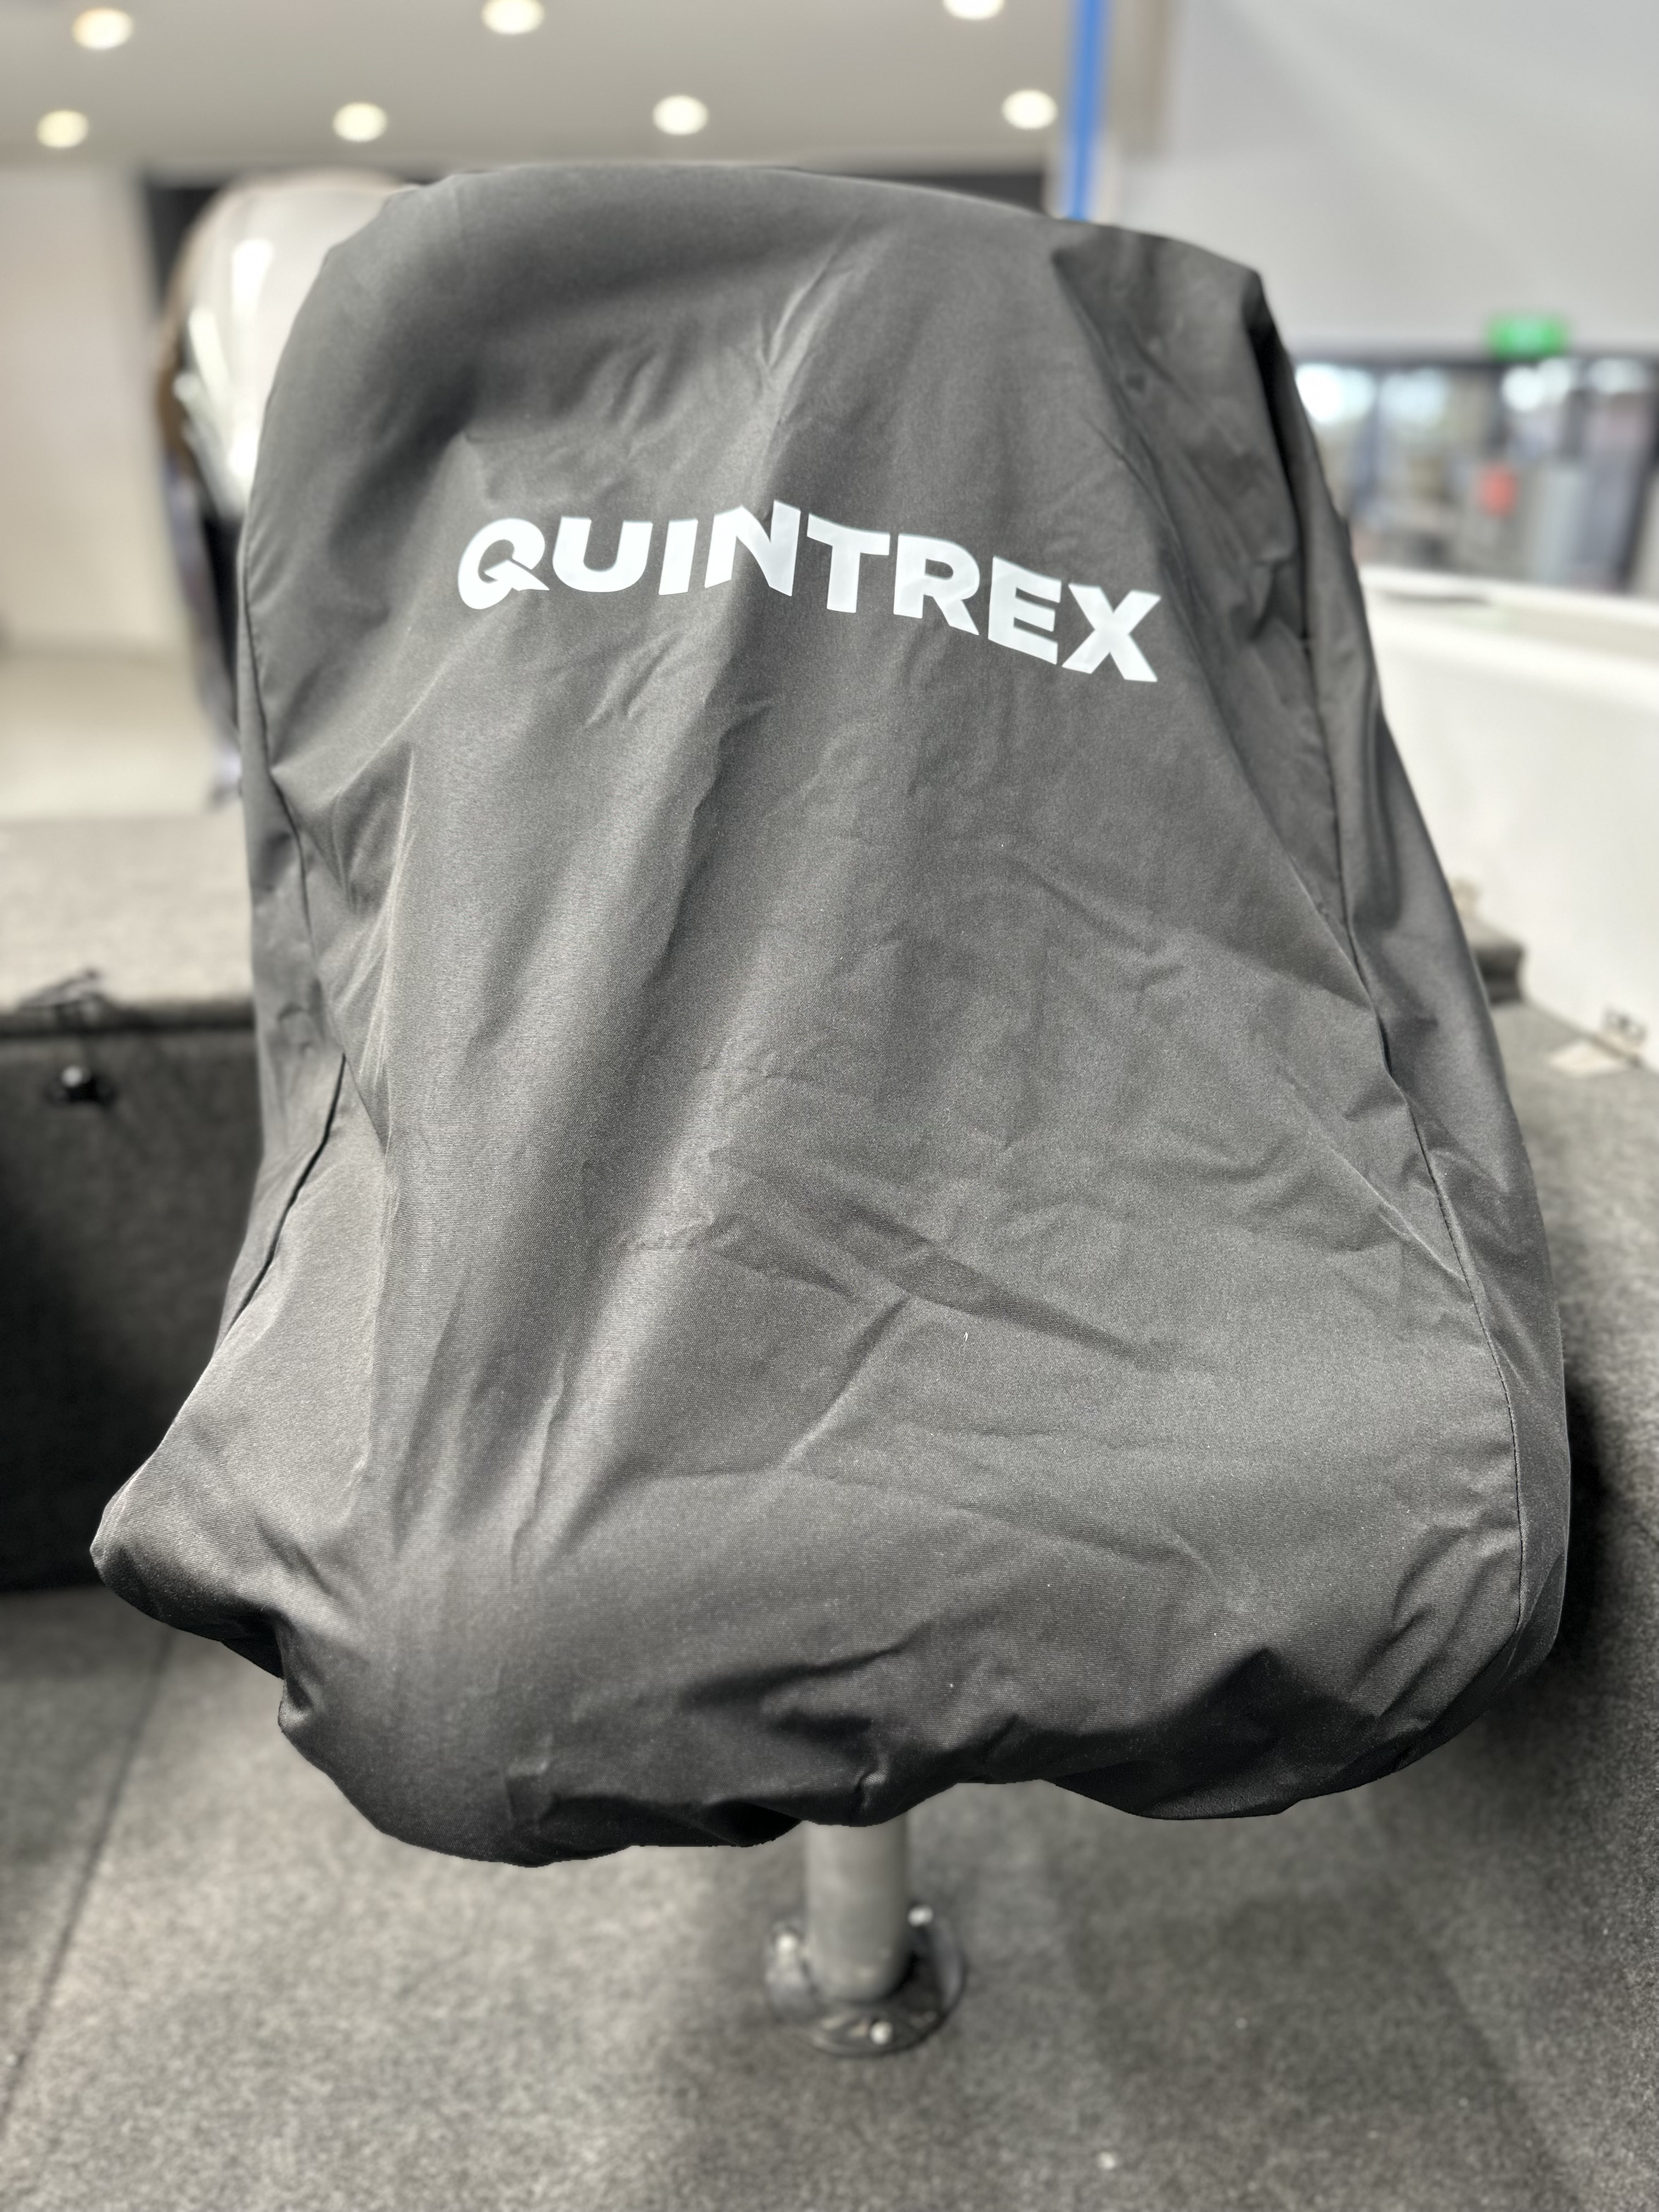 Quintrex Seat Covers